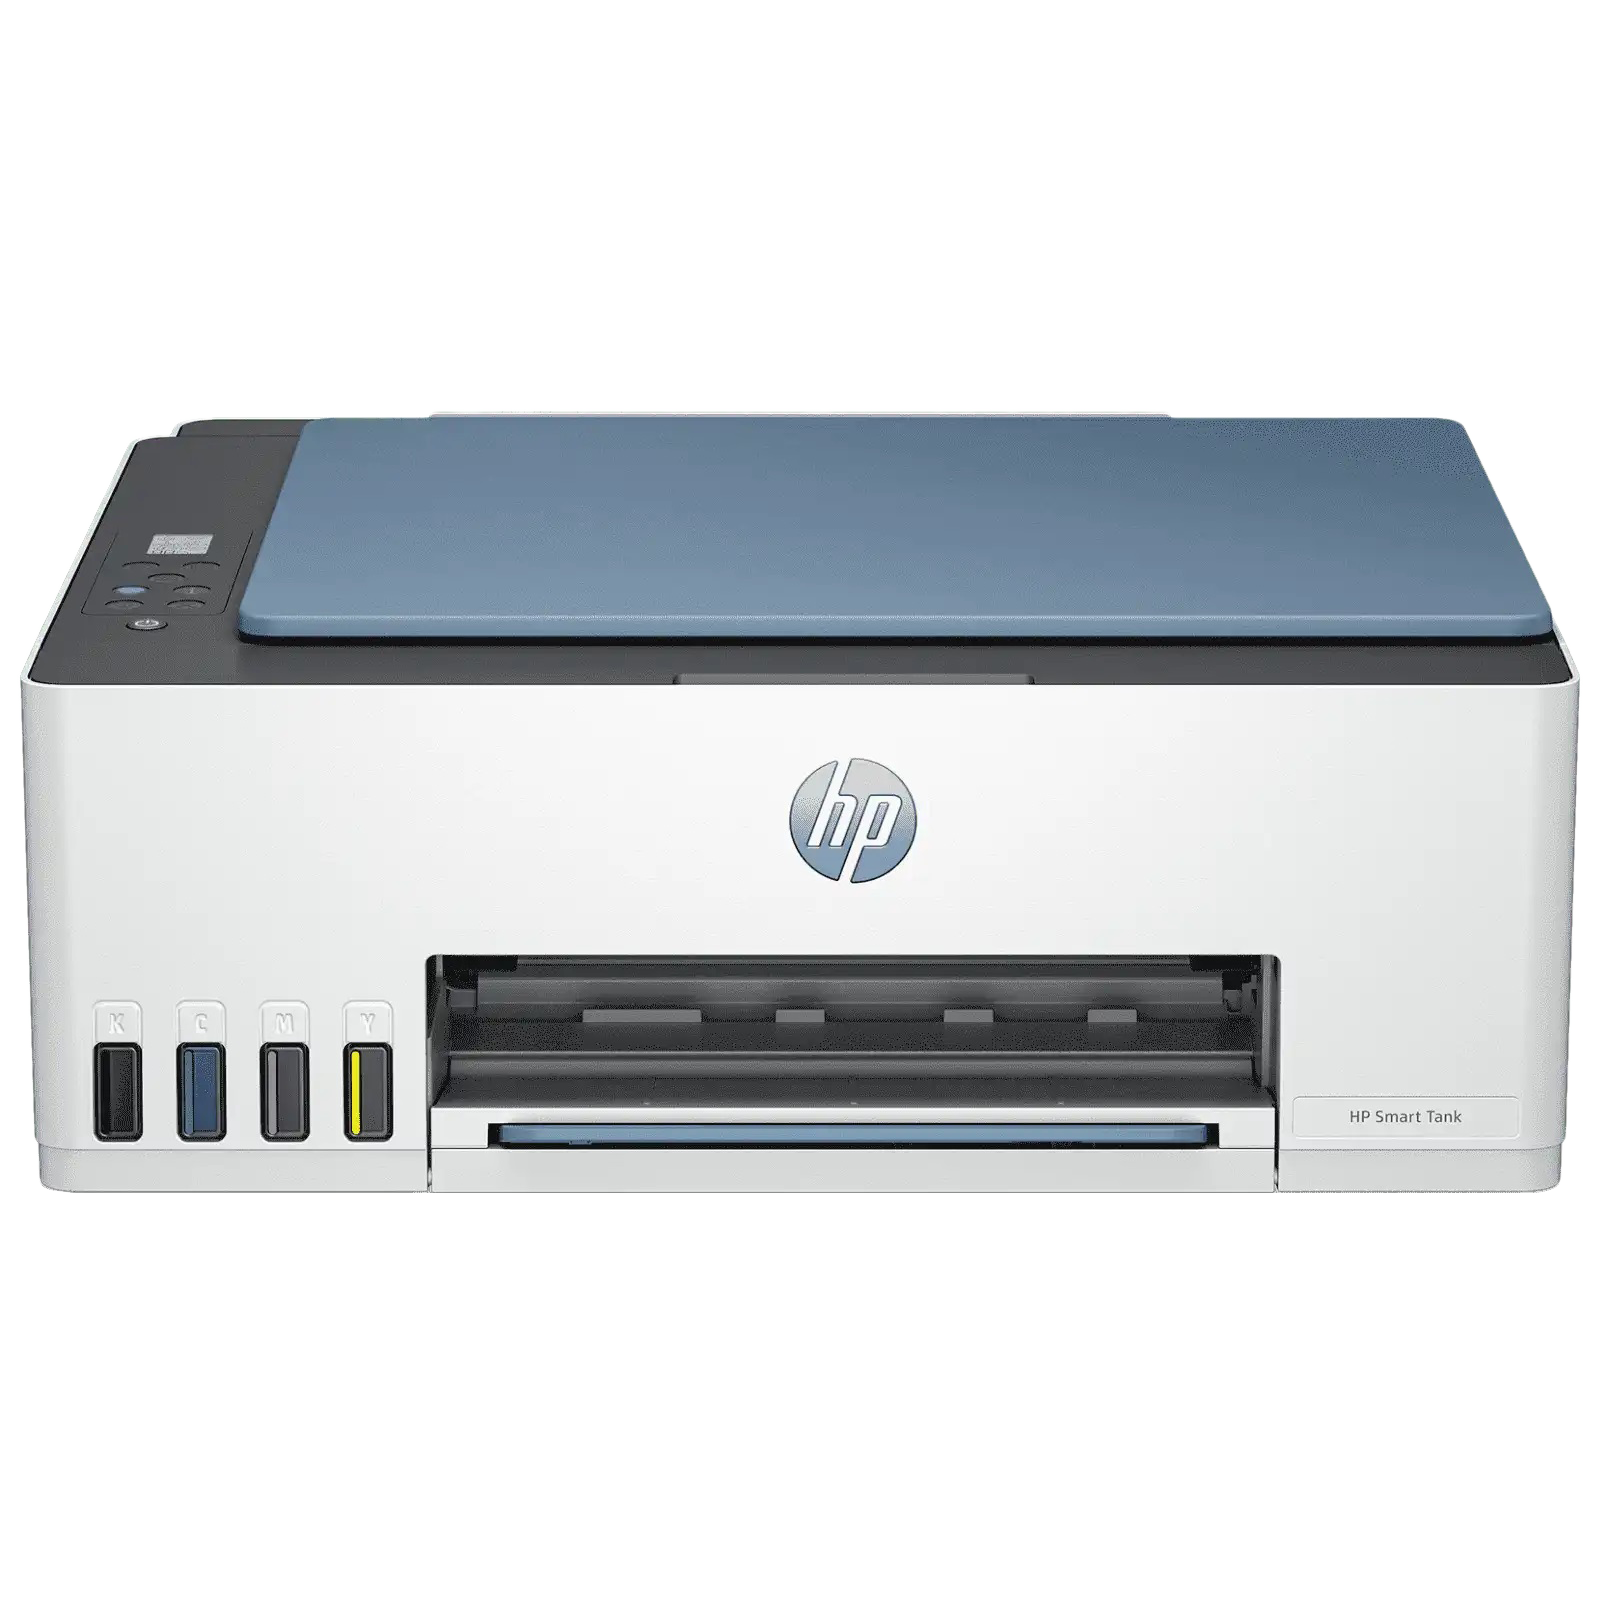 HP Smart Tank 585 Wireless Color All-in-One Inkjet Printer (HP Auto-Off Technology, 1F3Y4A, White)